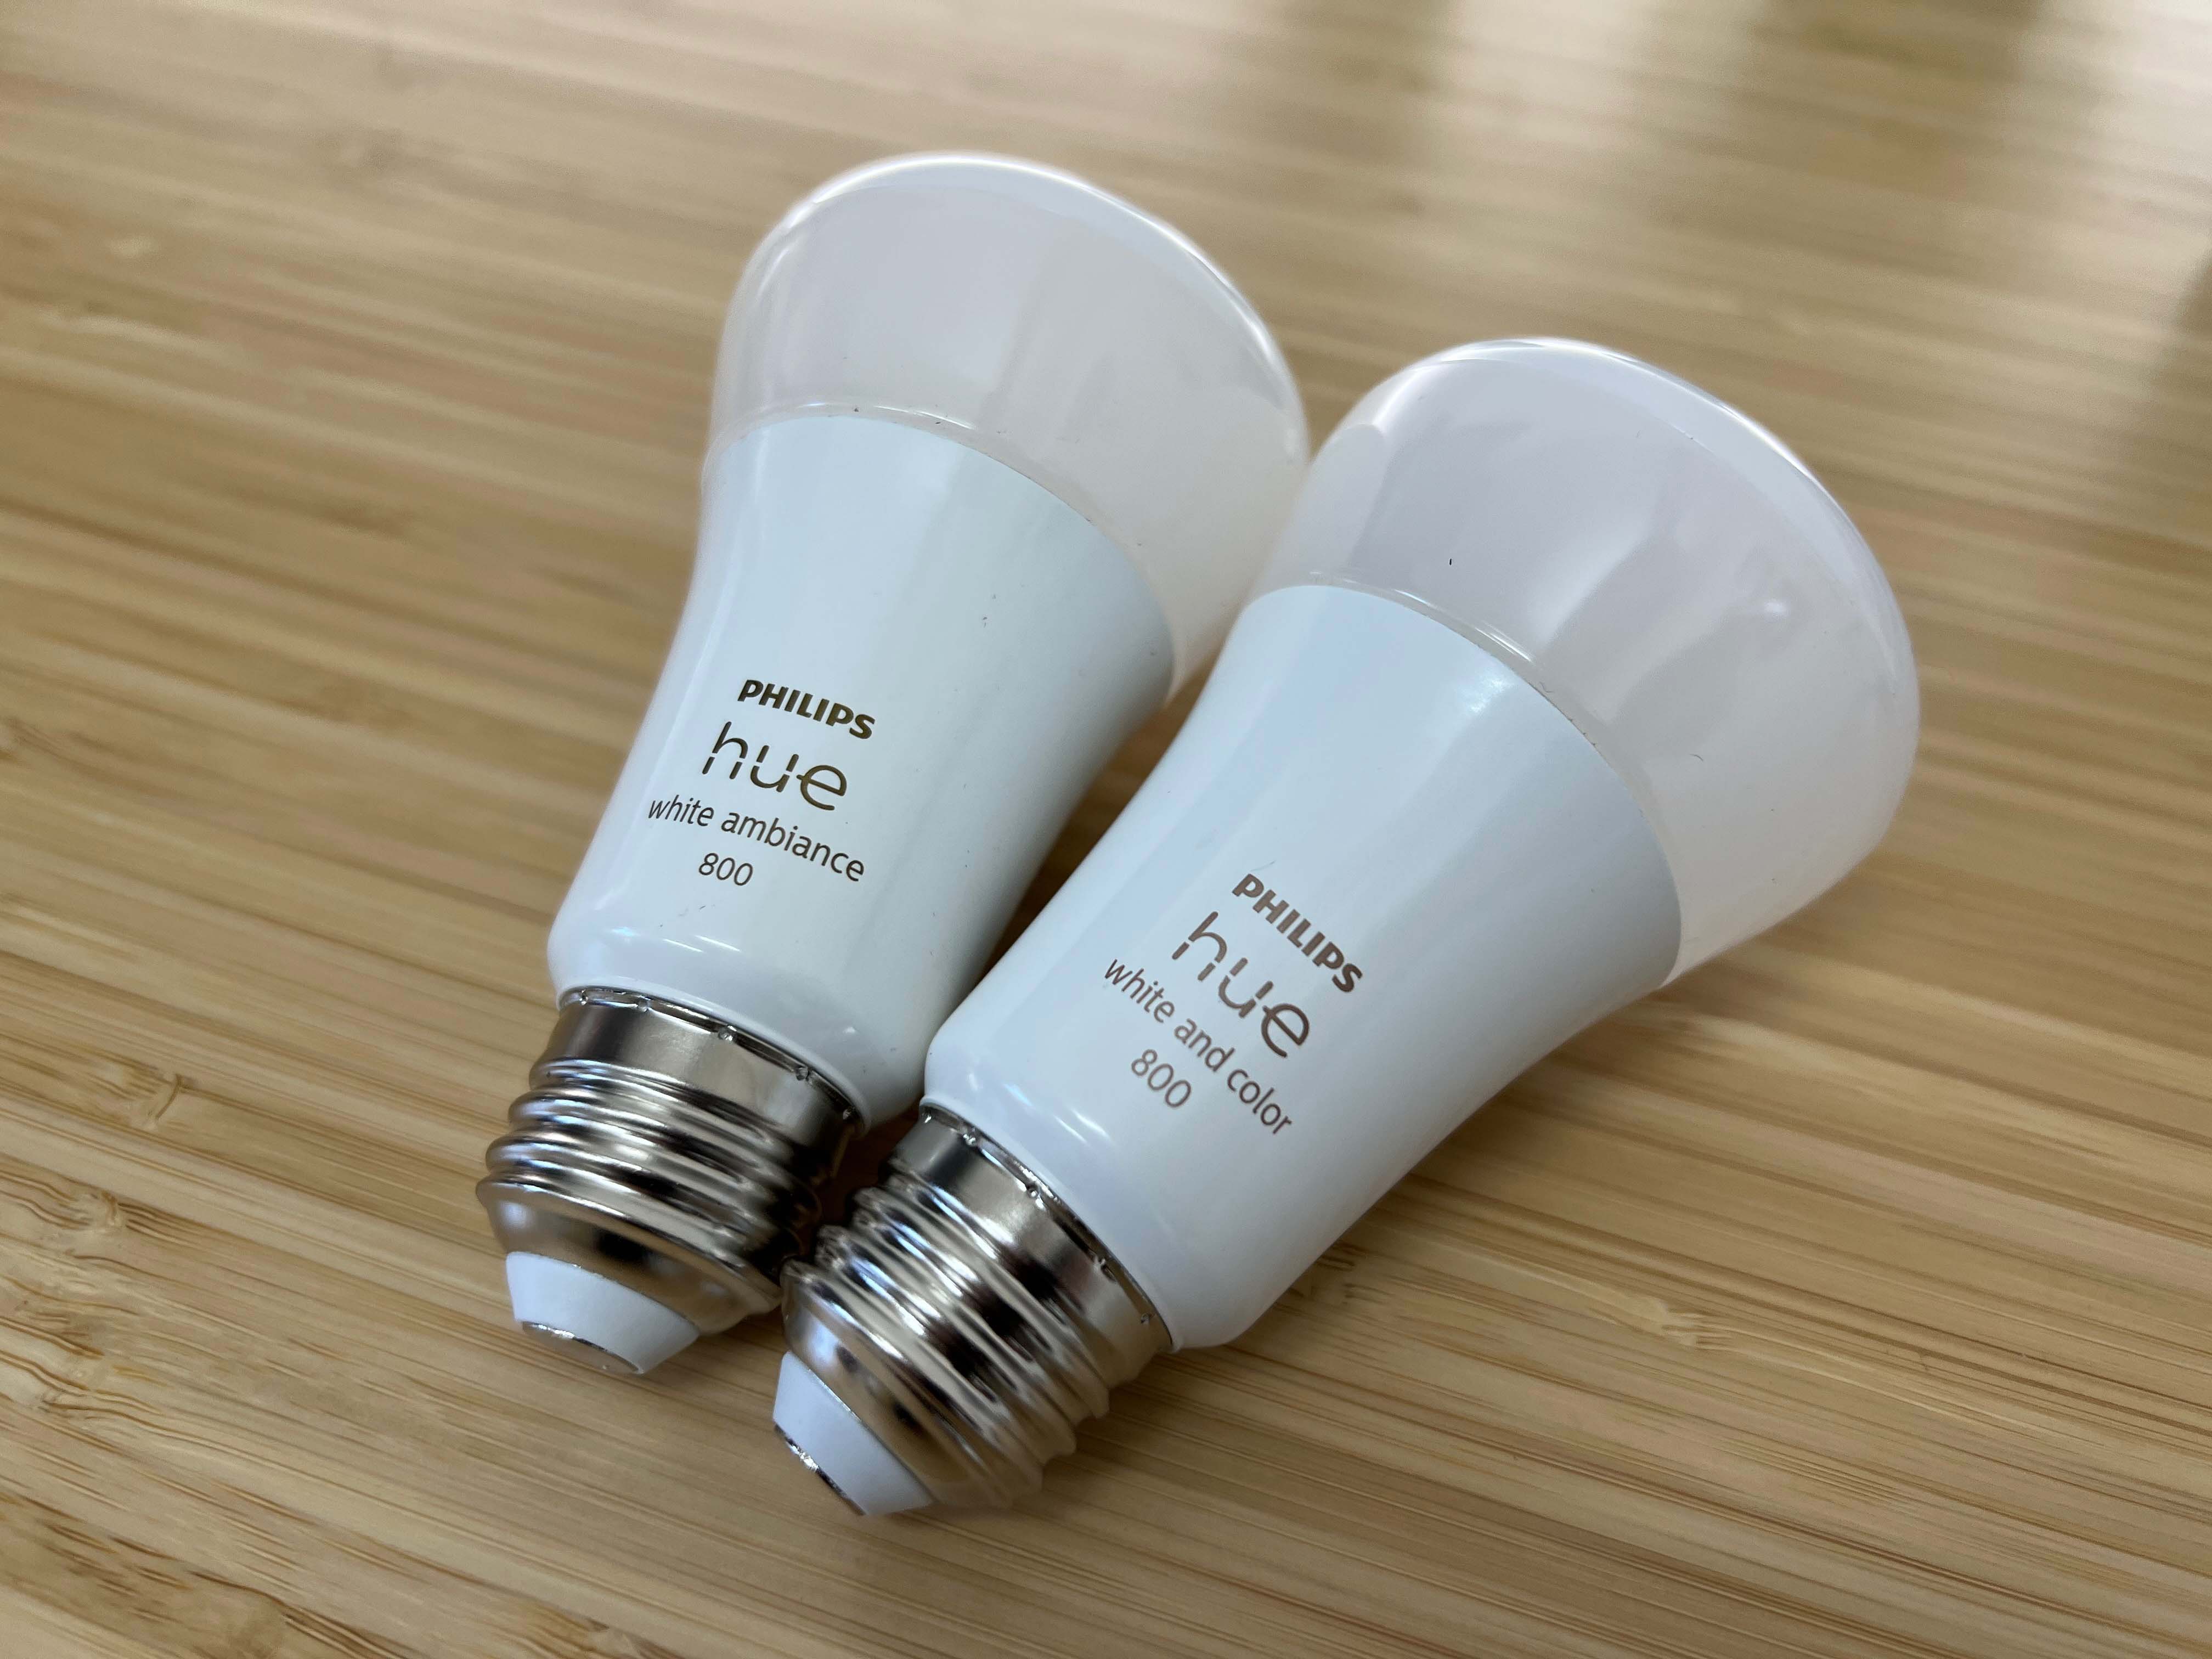 Philips Hue kits make for a worthy, but expensive entry into smart | CNN Underscored